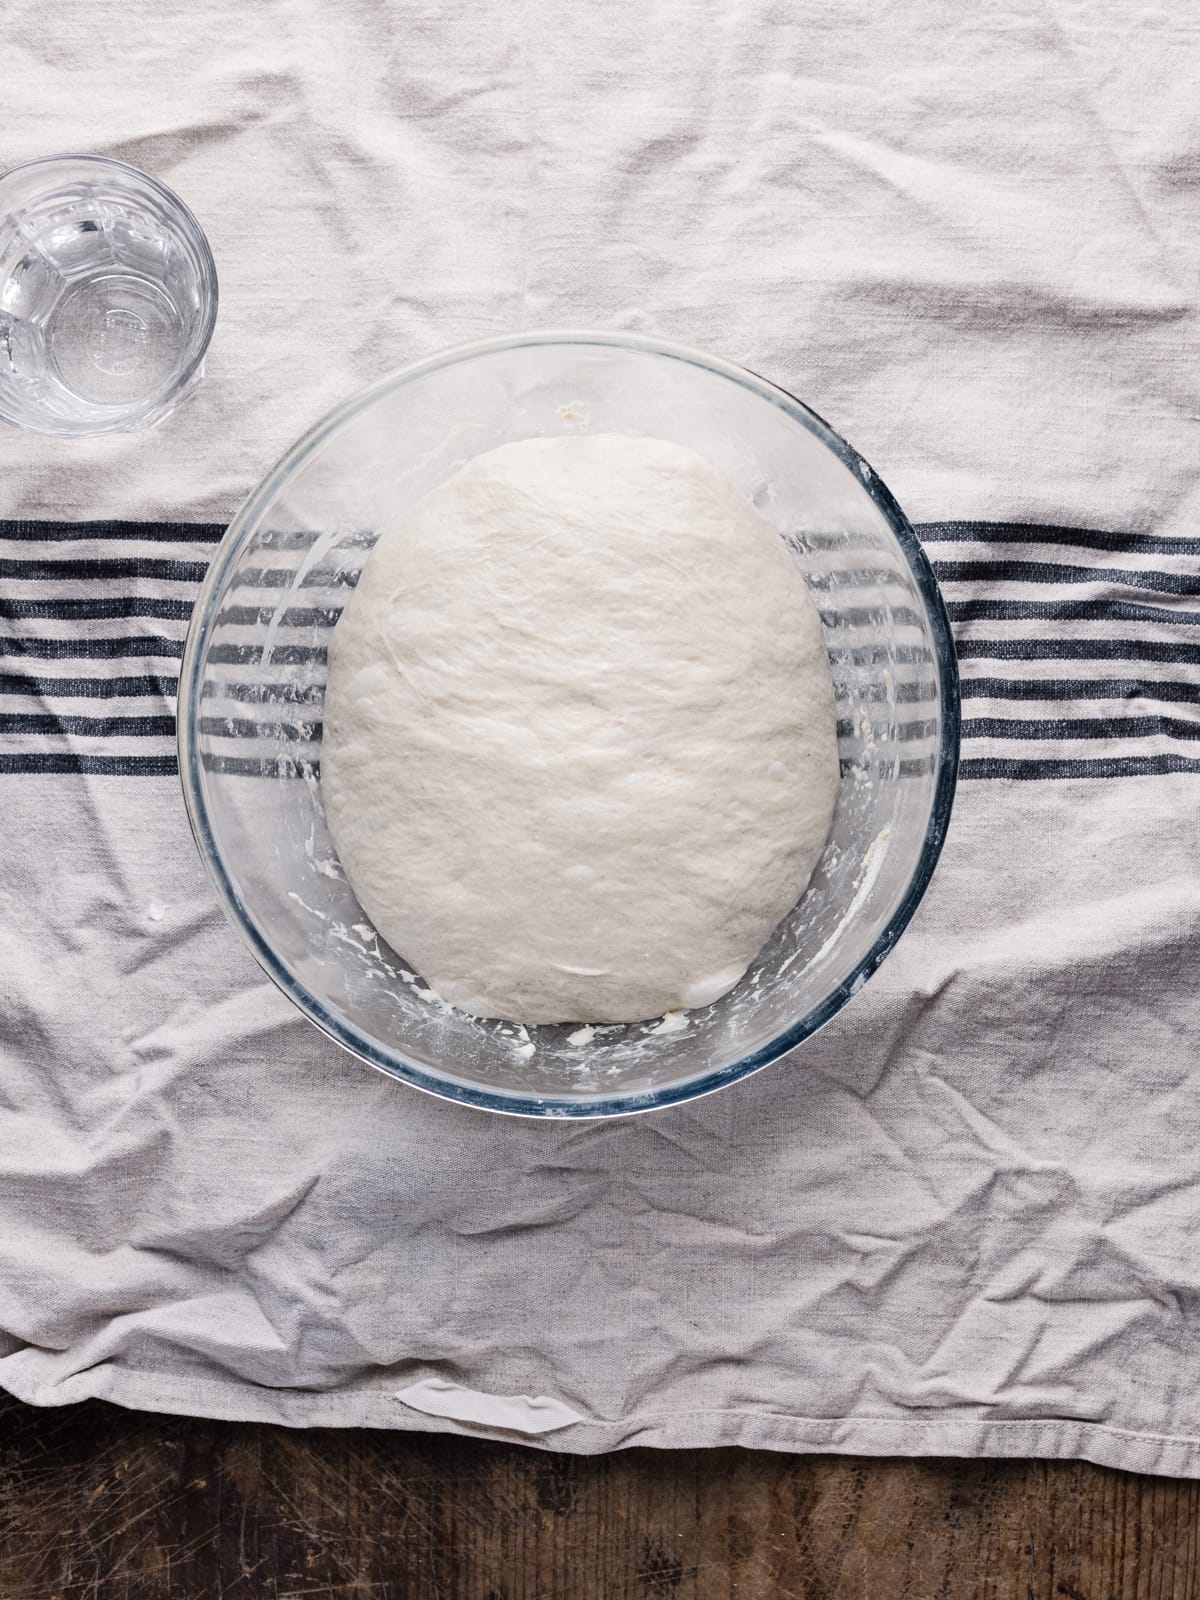 Showing the step on how the dough should like after the rise time.